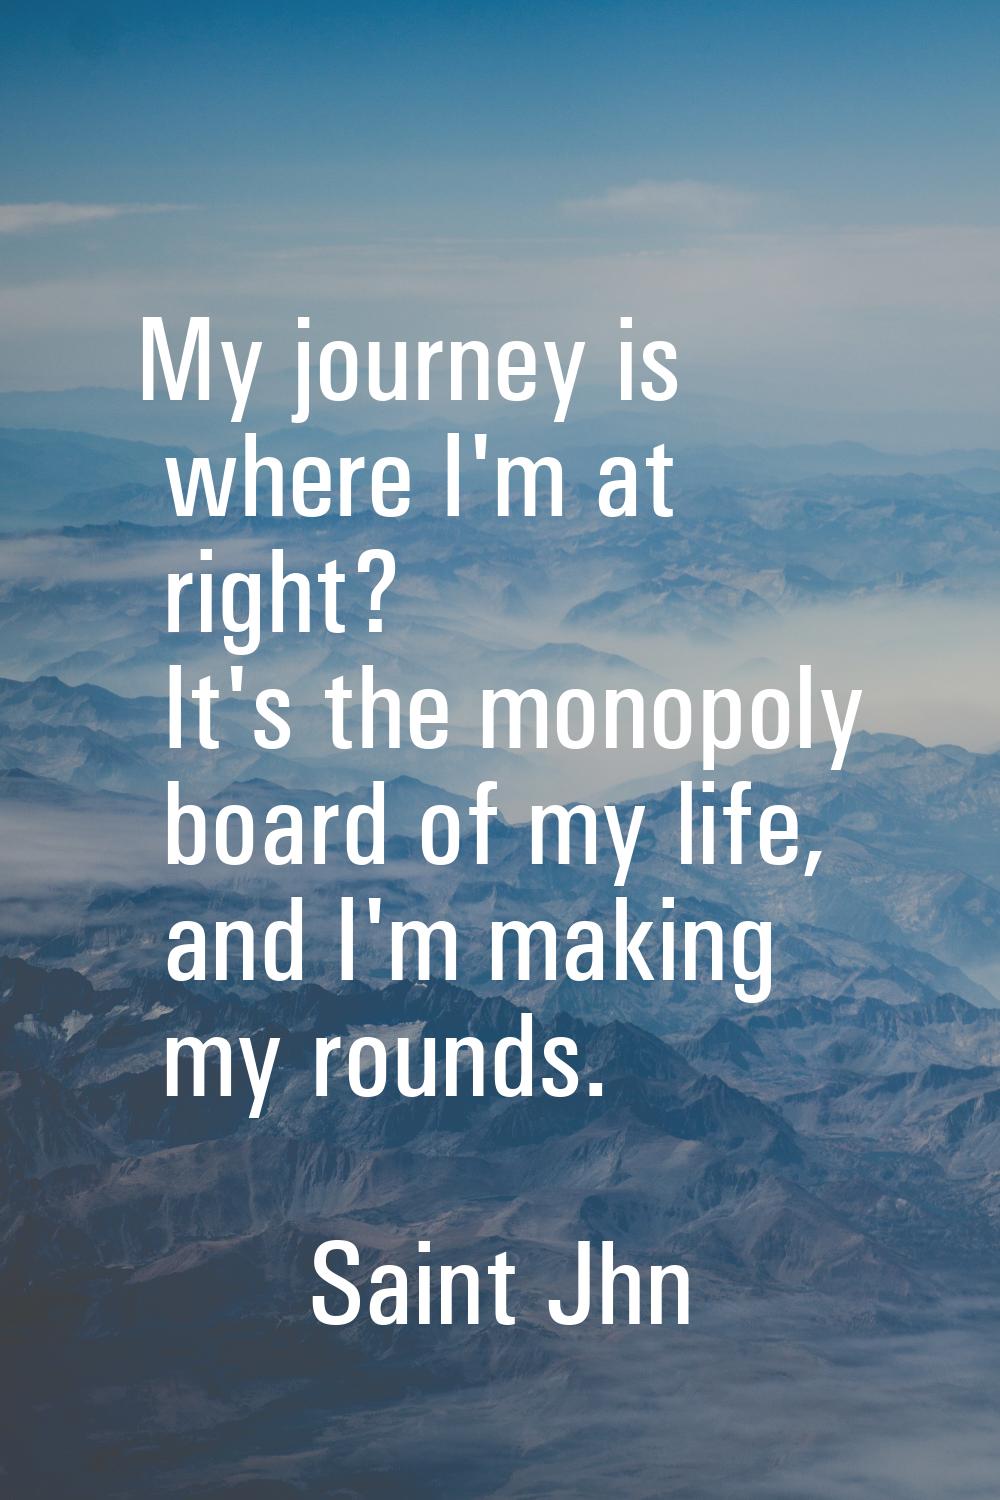 My journey is where I'm at right? It's the monopoly board of my life, and I'm making my rounds.